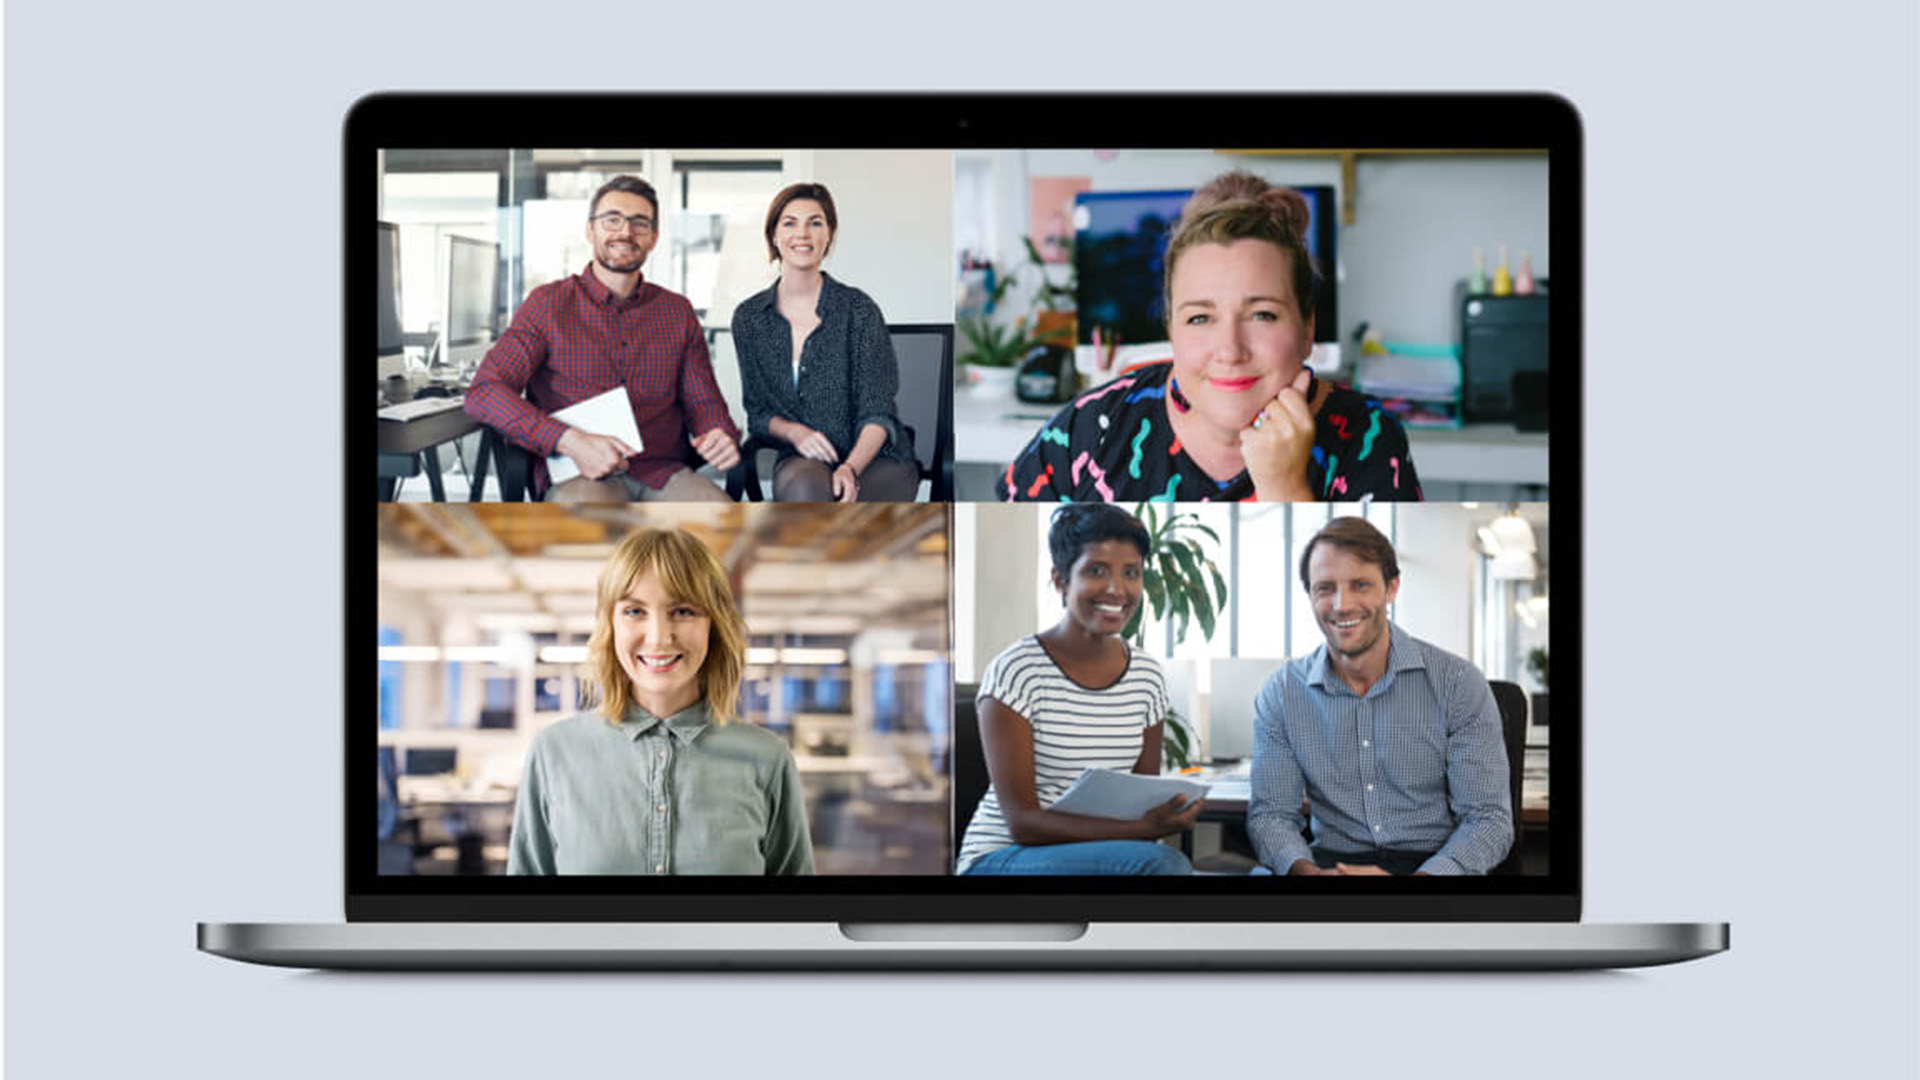 professionals-on-video-conferencing-call-split-screen